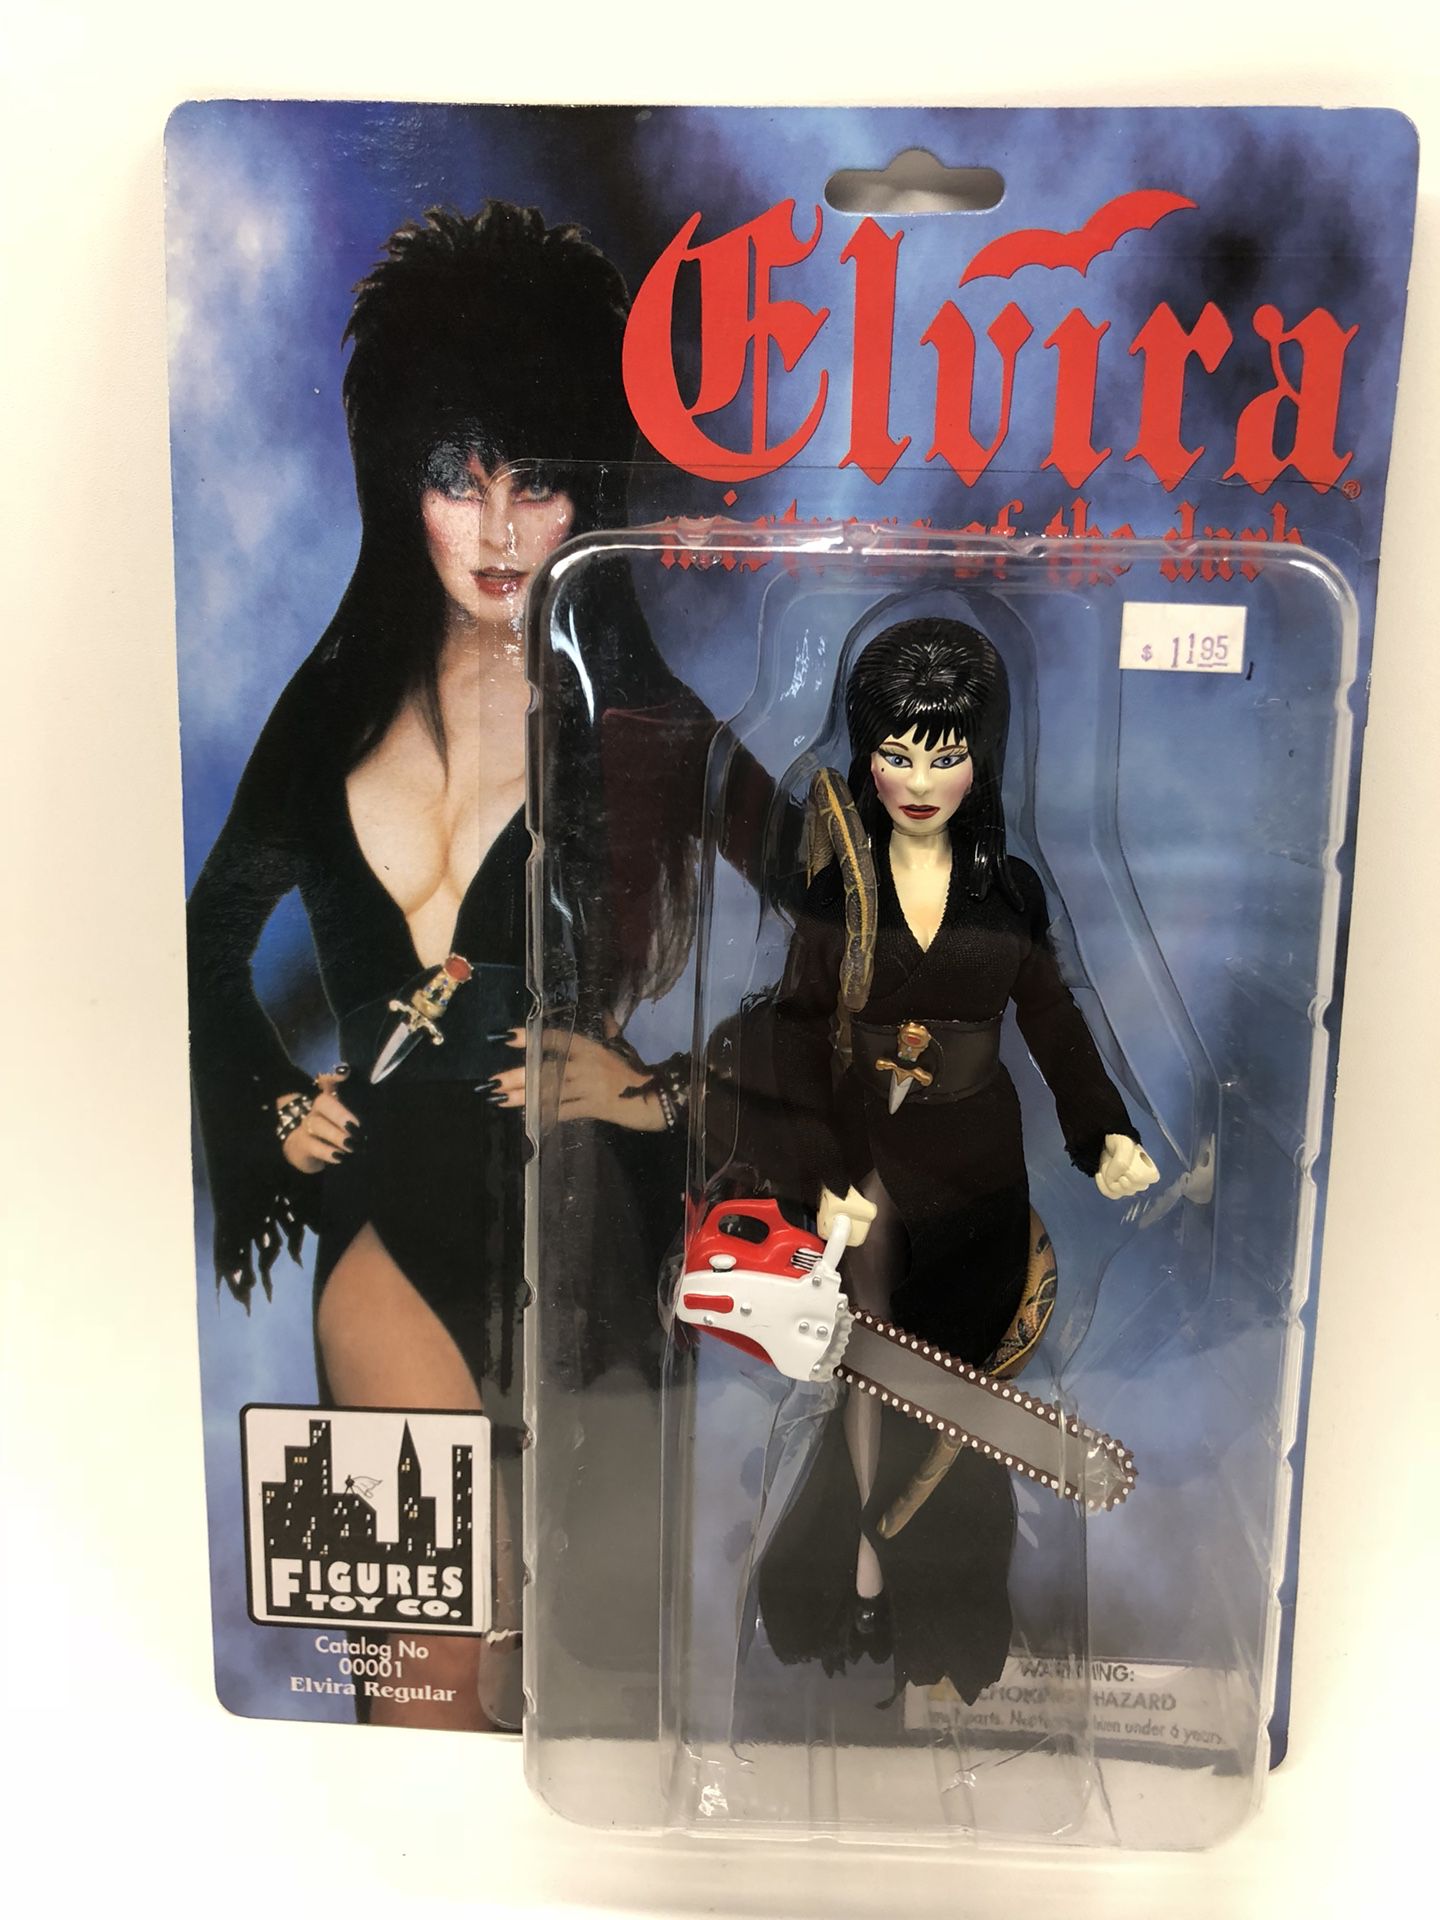 Elvira Mistress of the Dark - Vintage New in Boxes